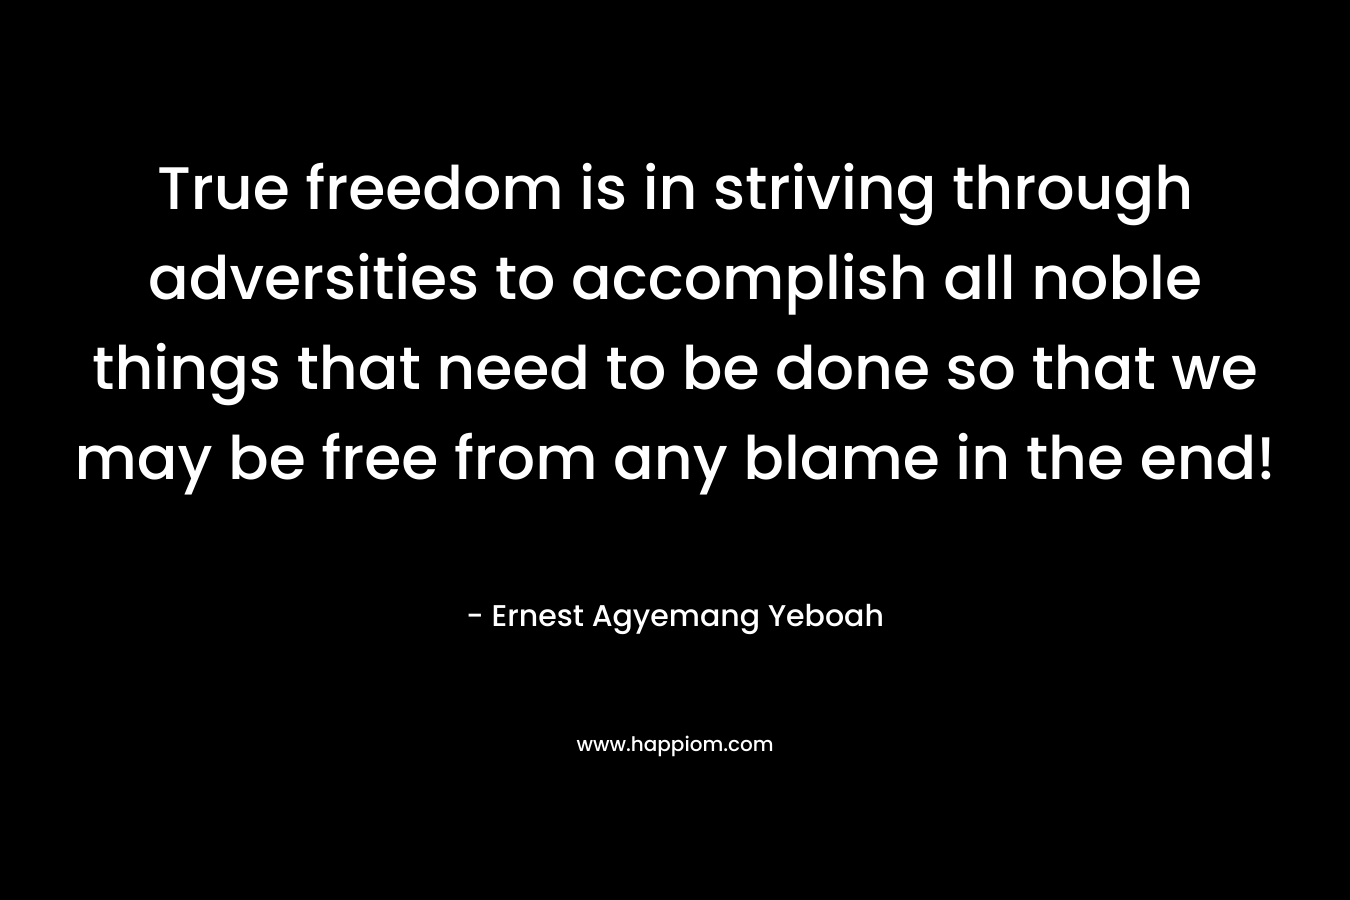 True freedom is in striving through adversities to accomplish all noble things that need to be done so that we may be free from any blame in the end!